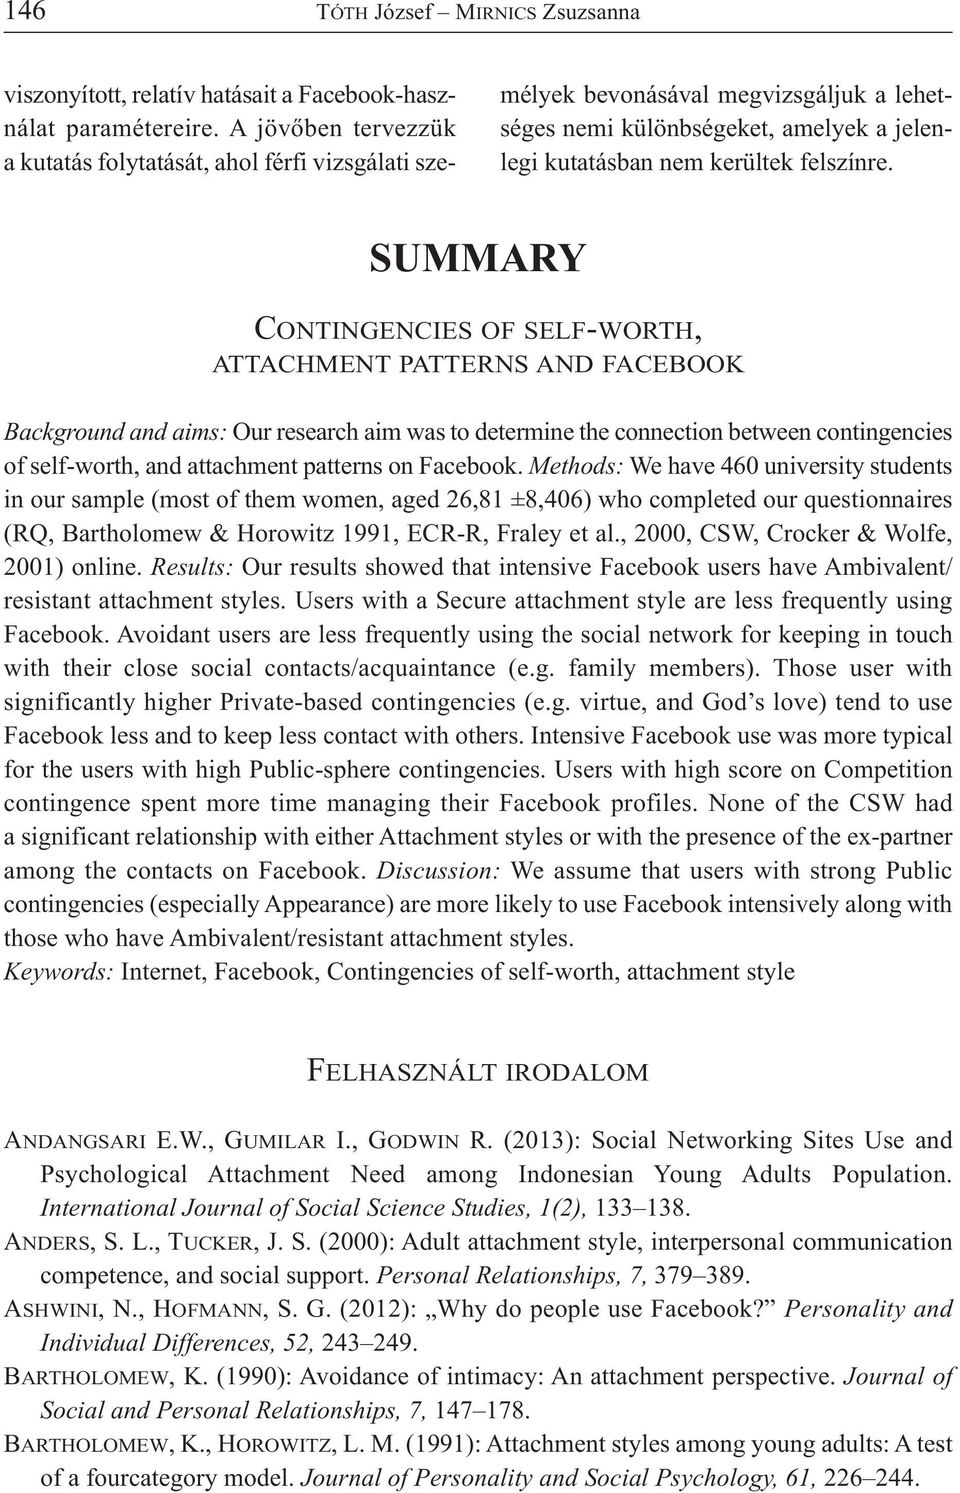 SUMMARY CONTINGENCIES OF SELF-WORTH, ATTACHMENT PATTERNS AND FACEBOOK Background and aims: Our research aim was to determine the connection between contingencies of self-worth, and attachment